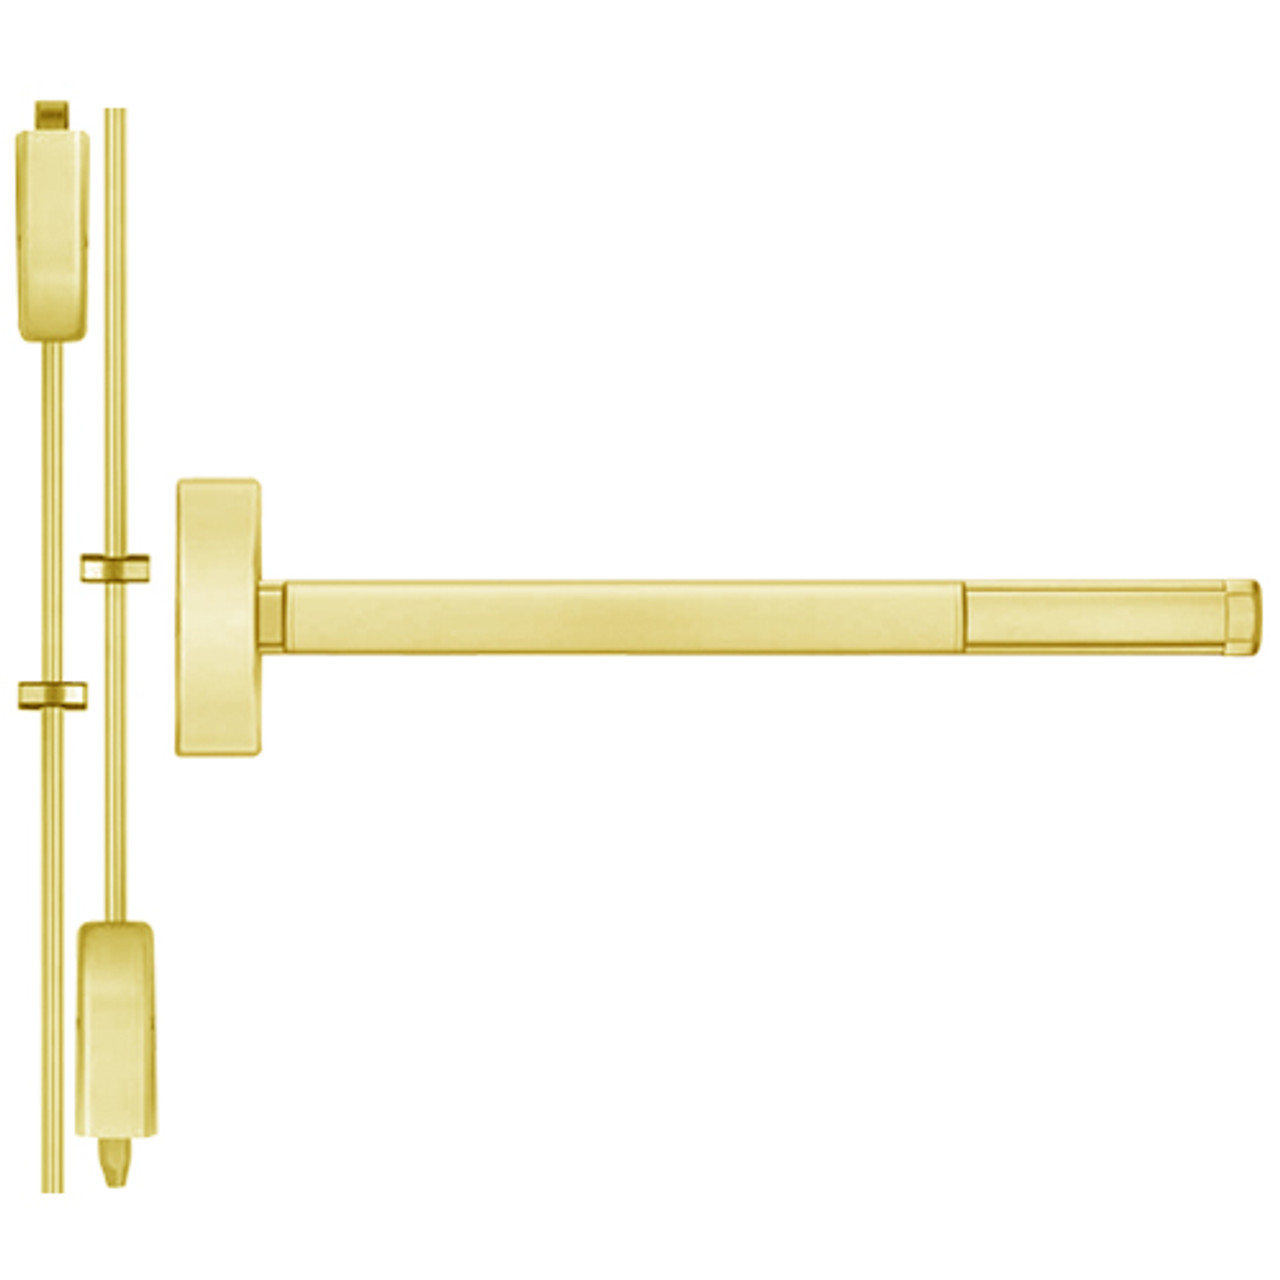 DEFL2208LBR-605-48 PHI 2200 Series Fire Rated Apex Surface Vertical Rod Device with Delayed Egress Prepped for Key Controls Lever/Knob in Bright Brass Finish